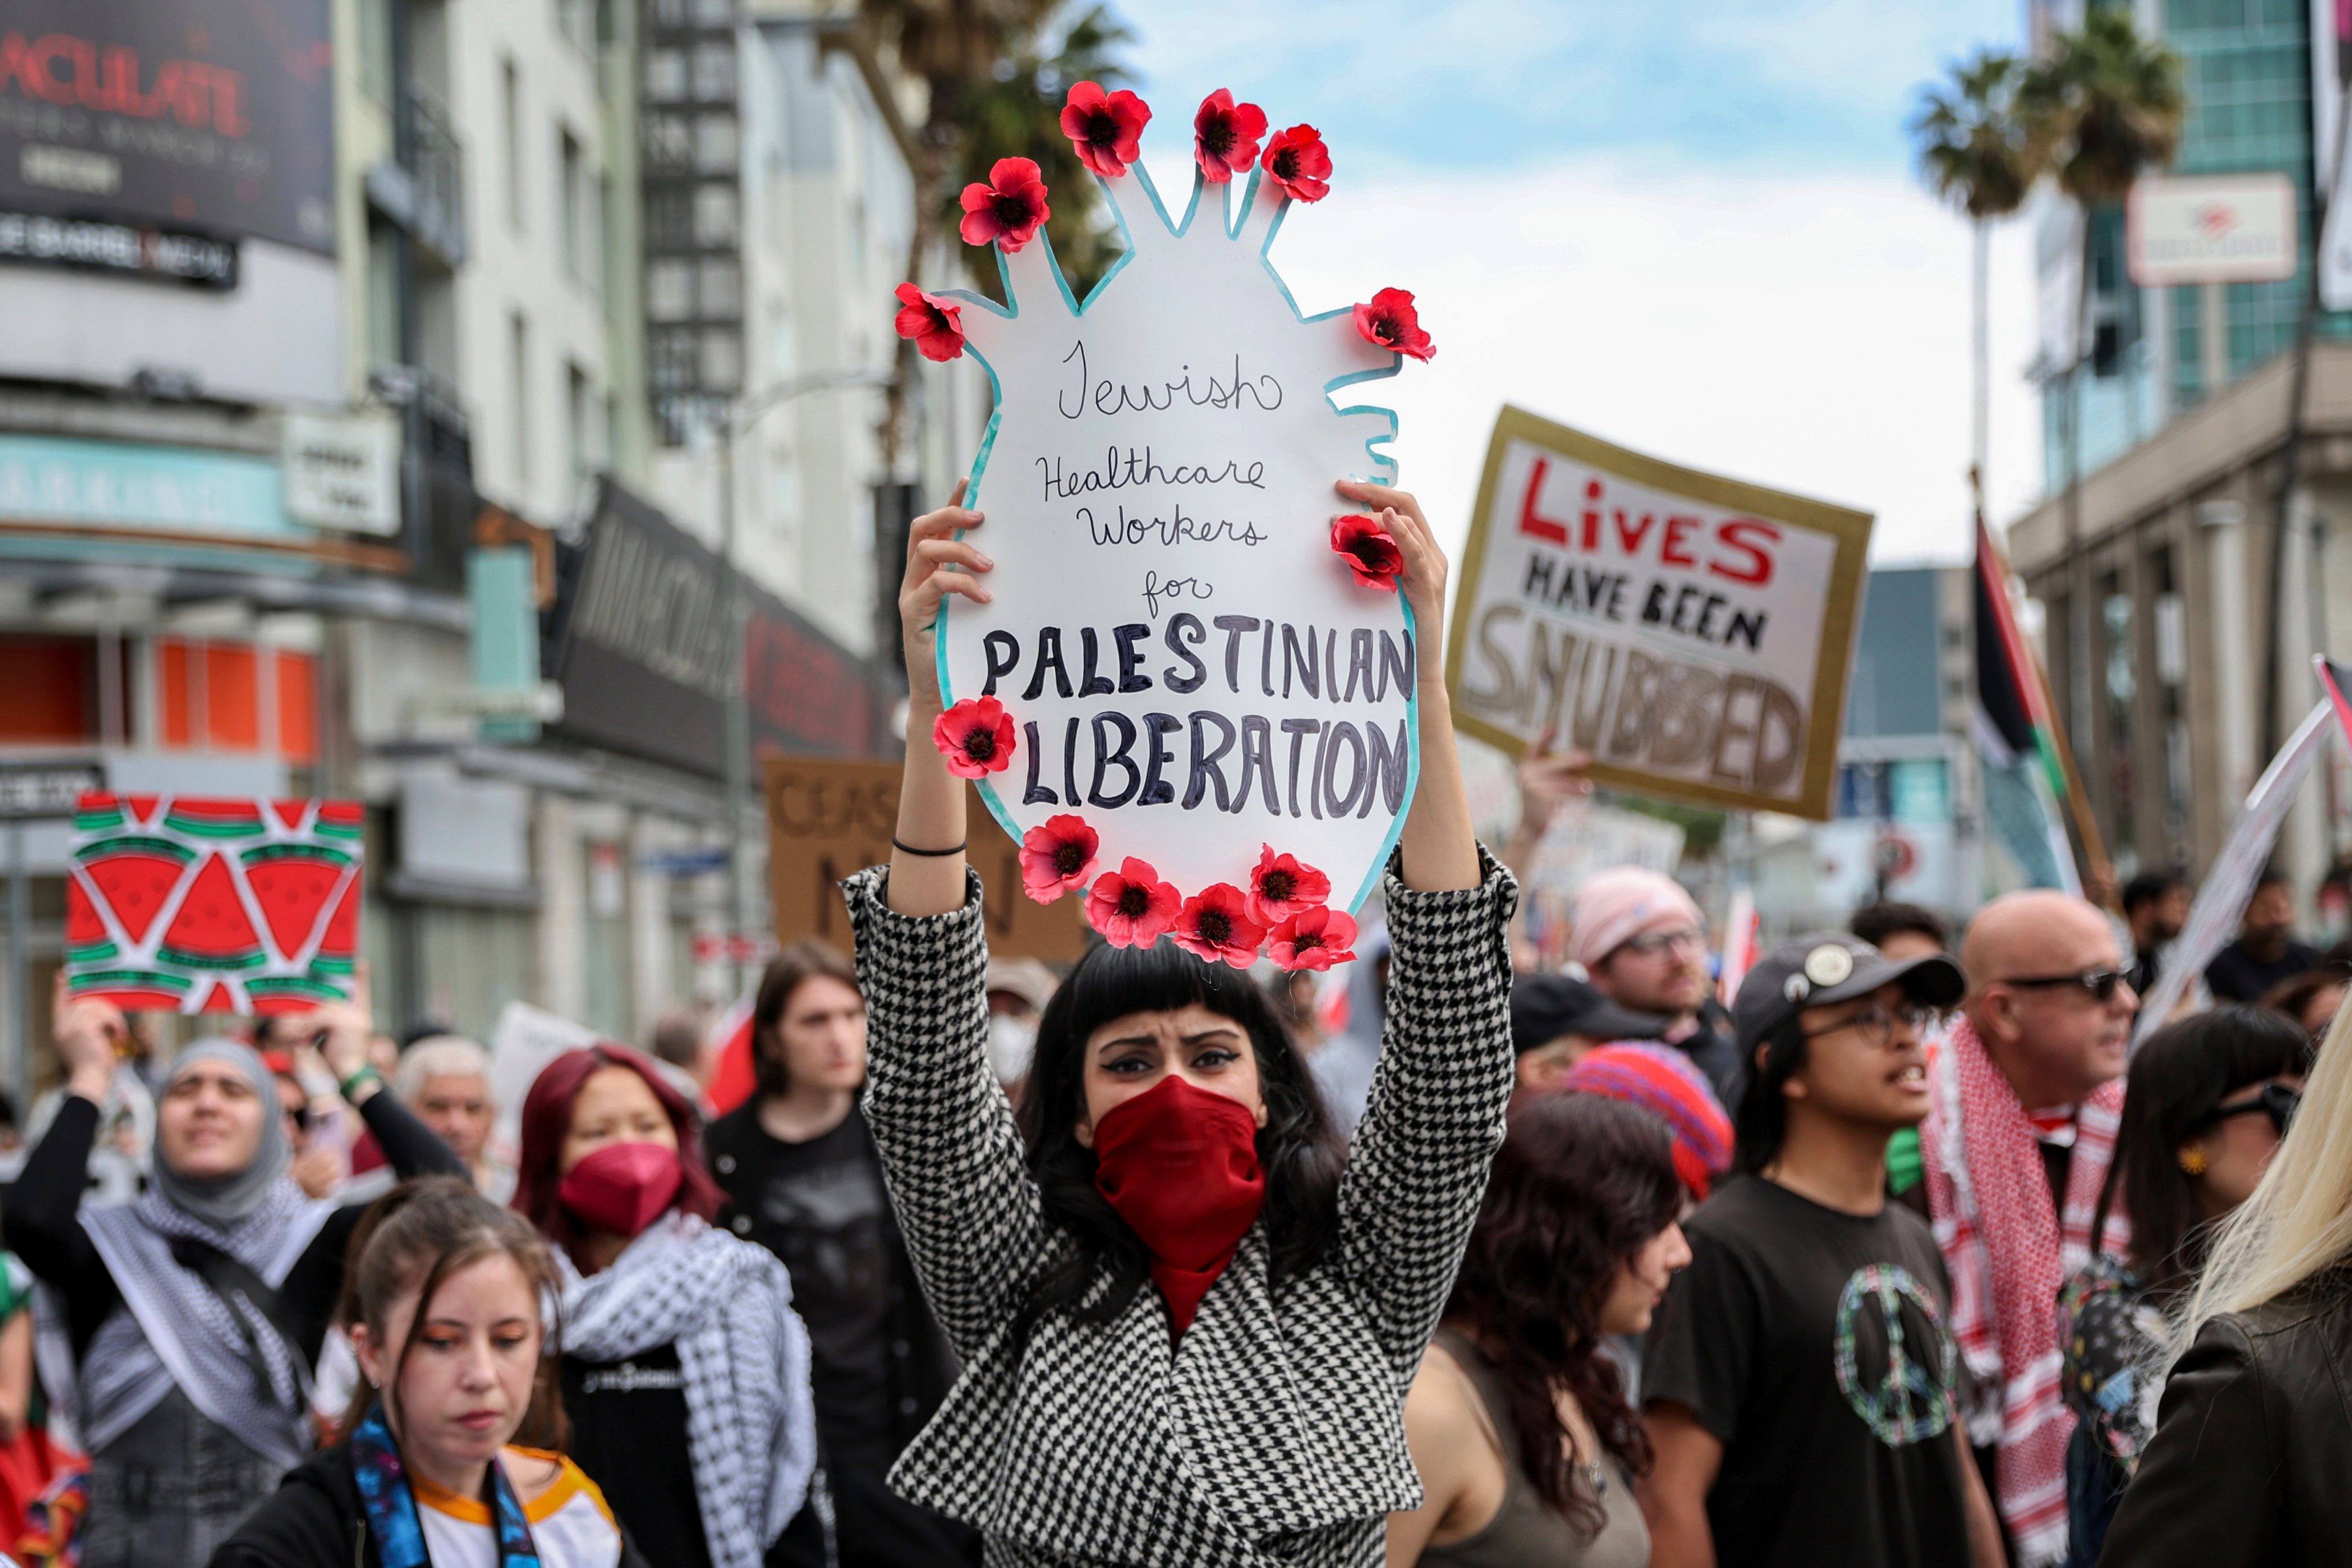 A protester in Hollywood, Los Angeles on Sunday holds a poster during a demonstration calling for a ceasefire in Gaza as the Oscars ceremony is held nearby. Photo: AP